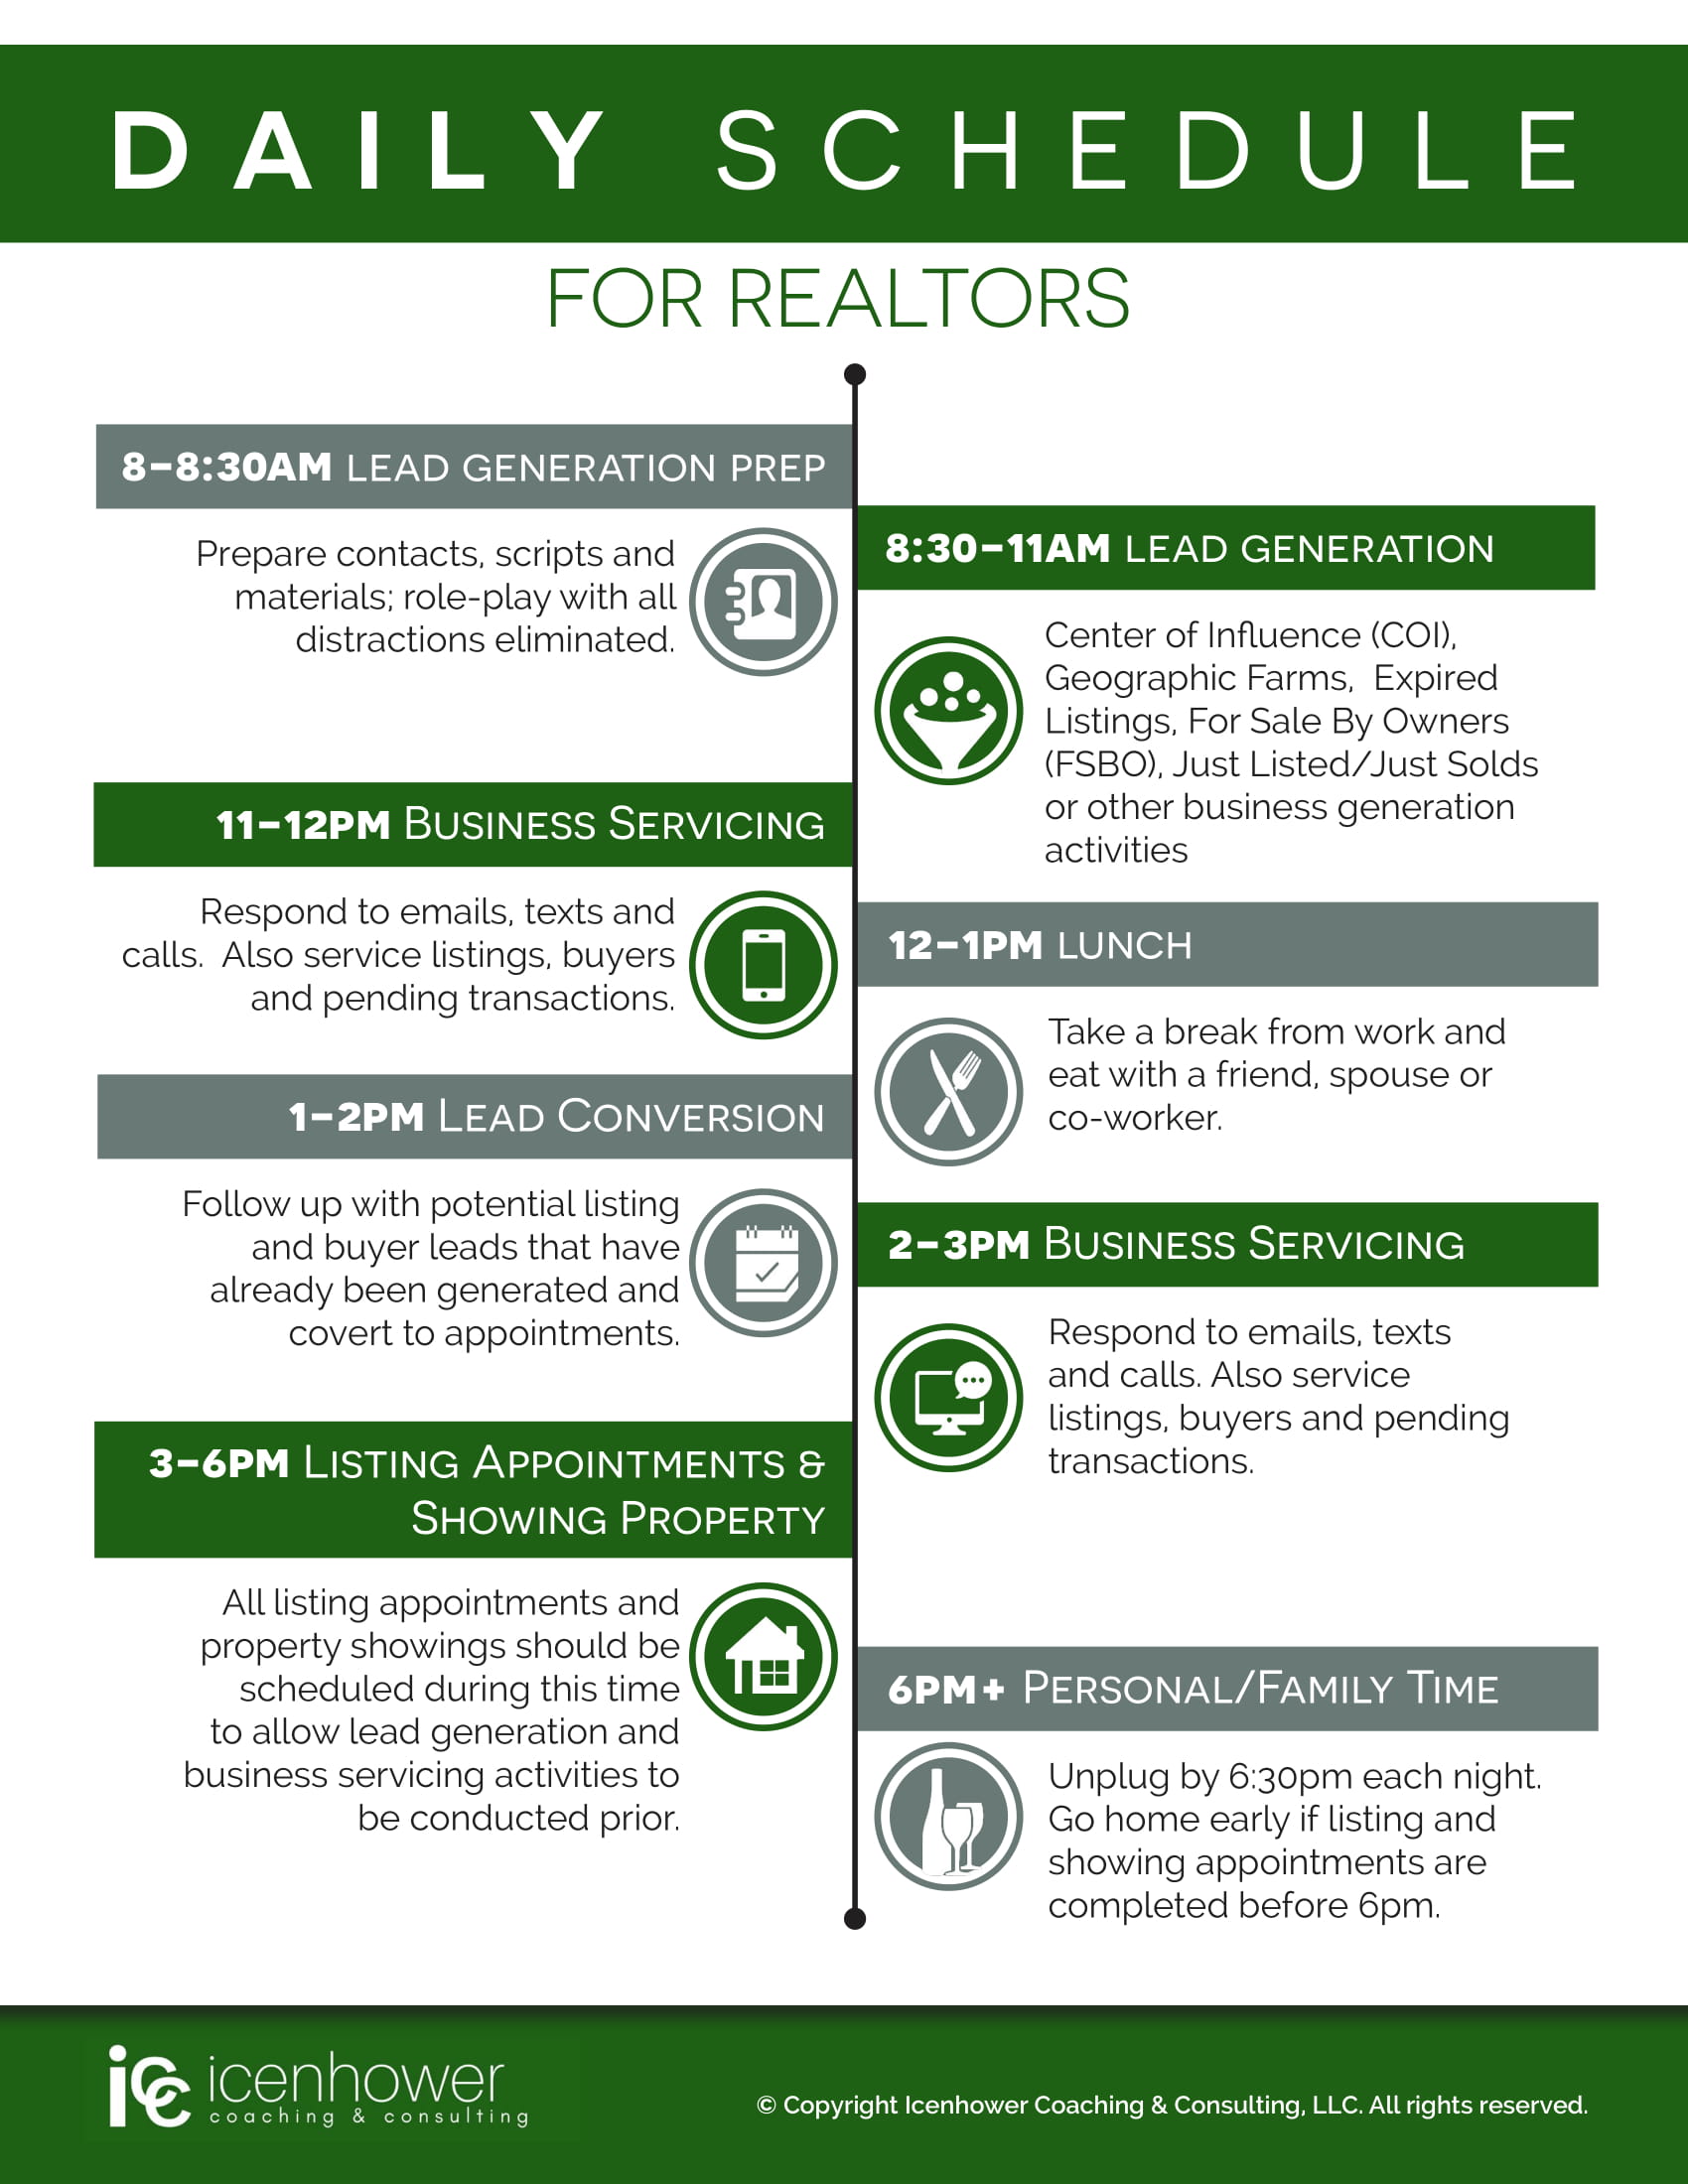 Top REALTOR Daily Schedule InfoGraphic